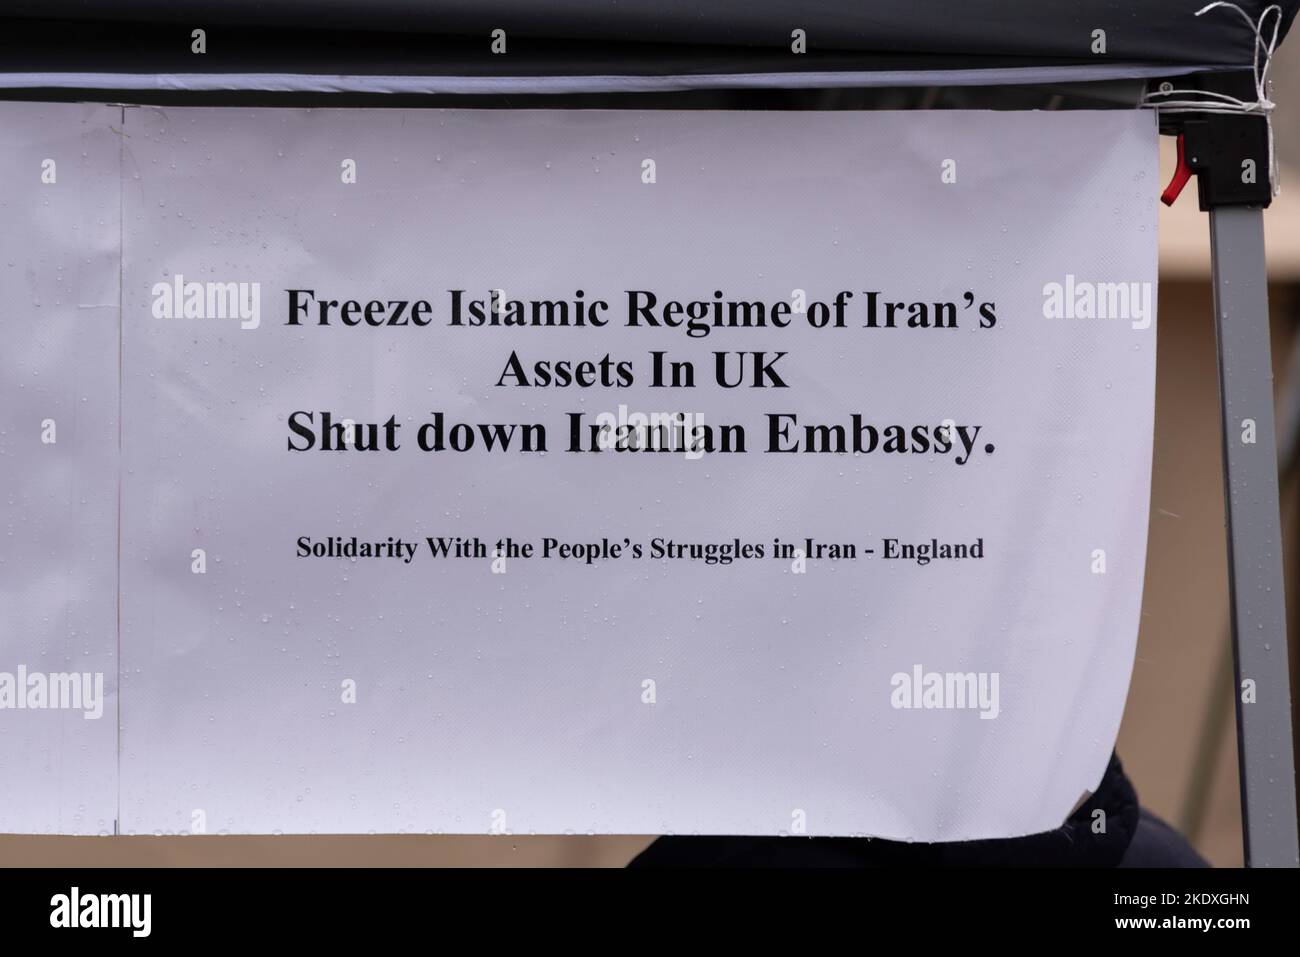 Protest message against Iran regime. Freeze Islamic Regime of Iran's assets in UK. Shut down Iranian Embassy. Solidarity with the people's struggles Stock Photo